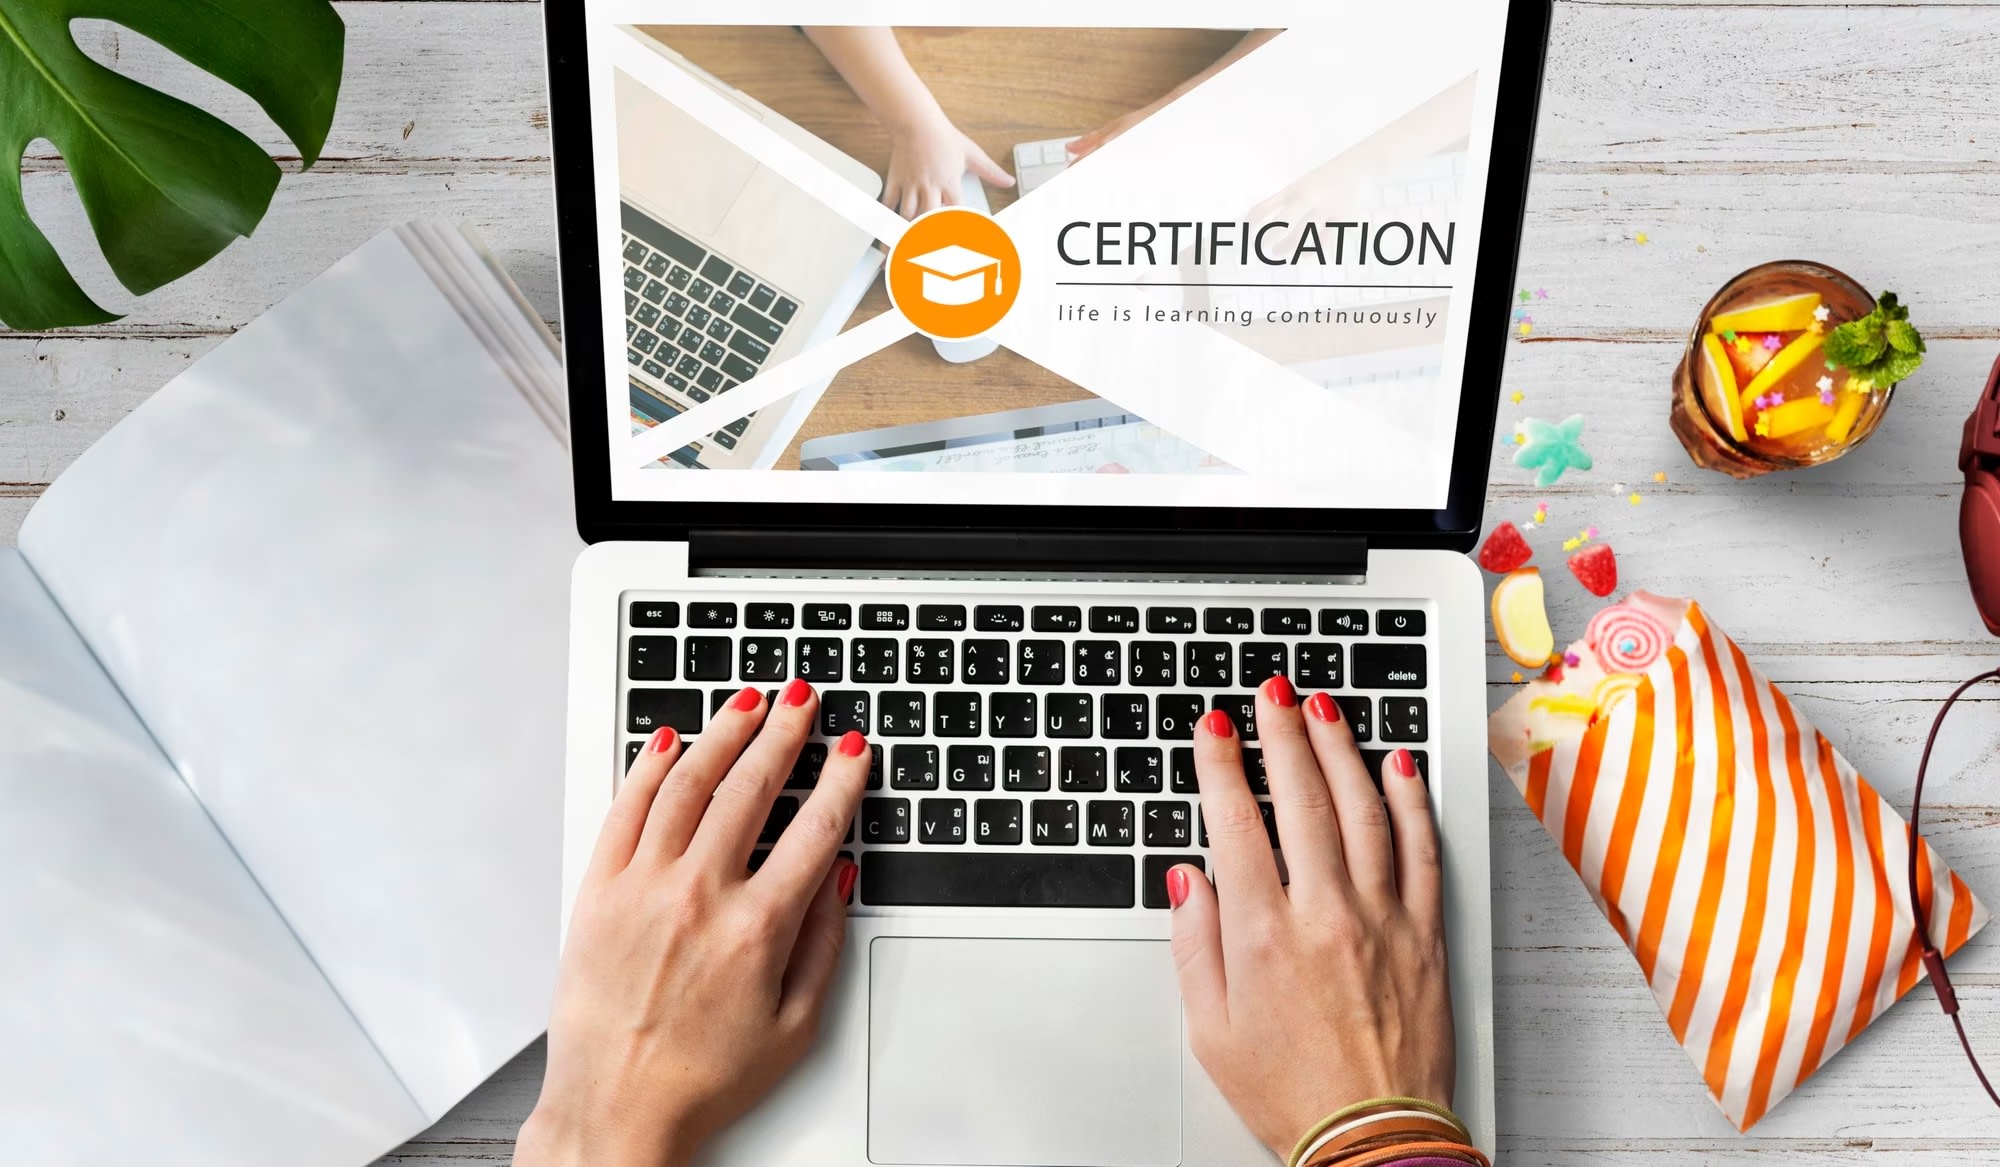 Image of hands typing on laptop with certification info on screen